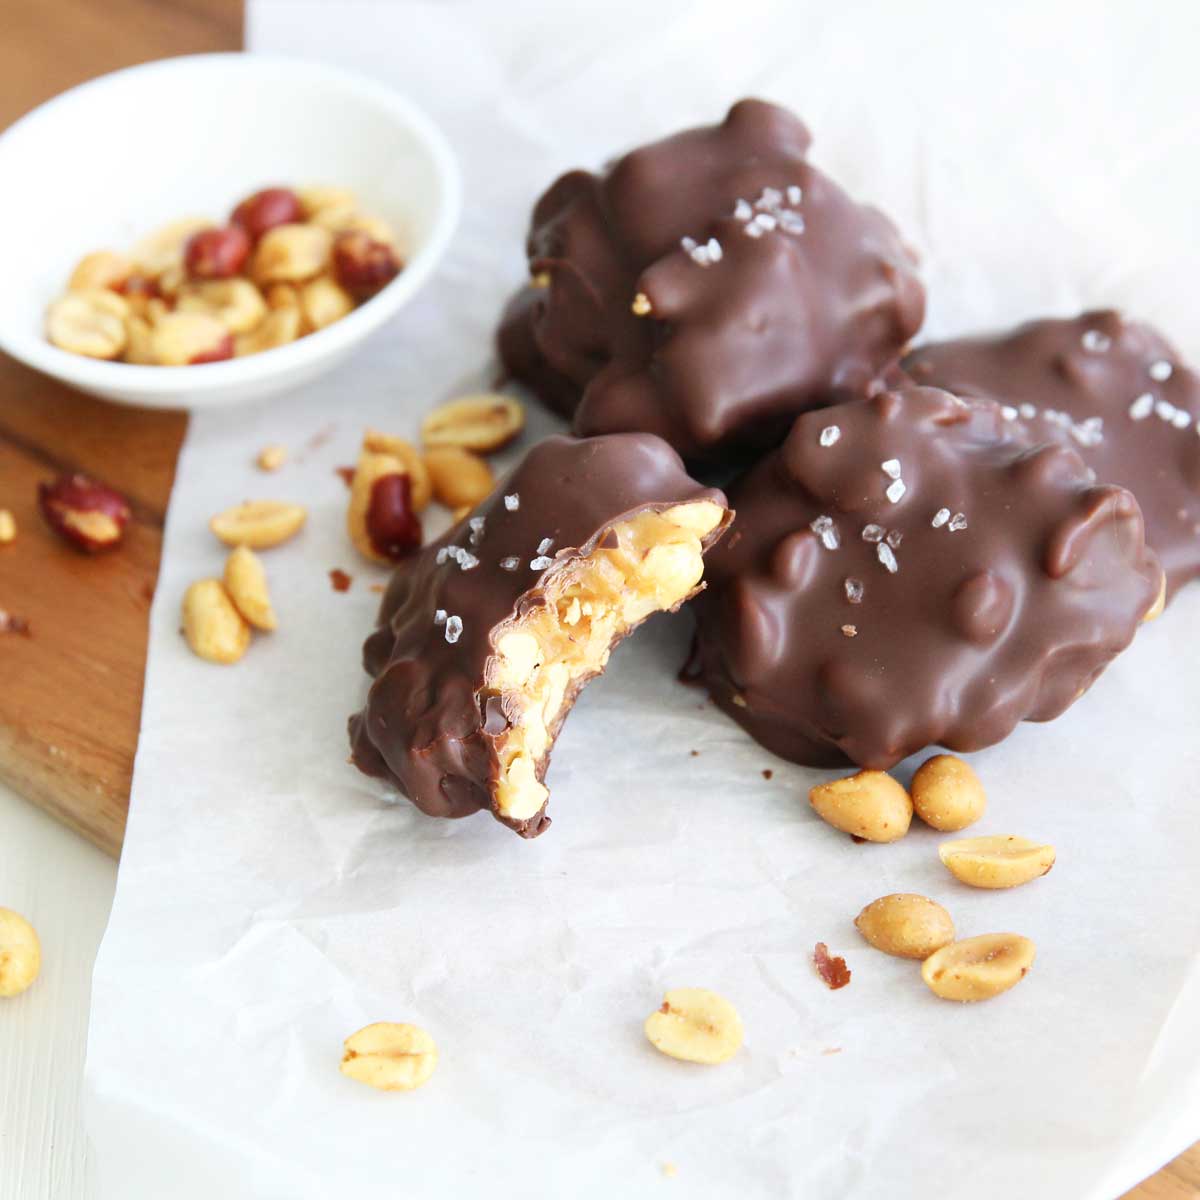 Chocolate Peanut Clusters with Collagen Caramel Filling (Easy, Keto Recipe) - Vegan Chocolate Whipped Cream